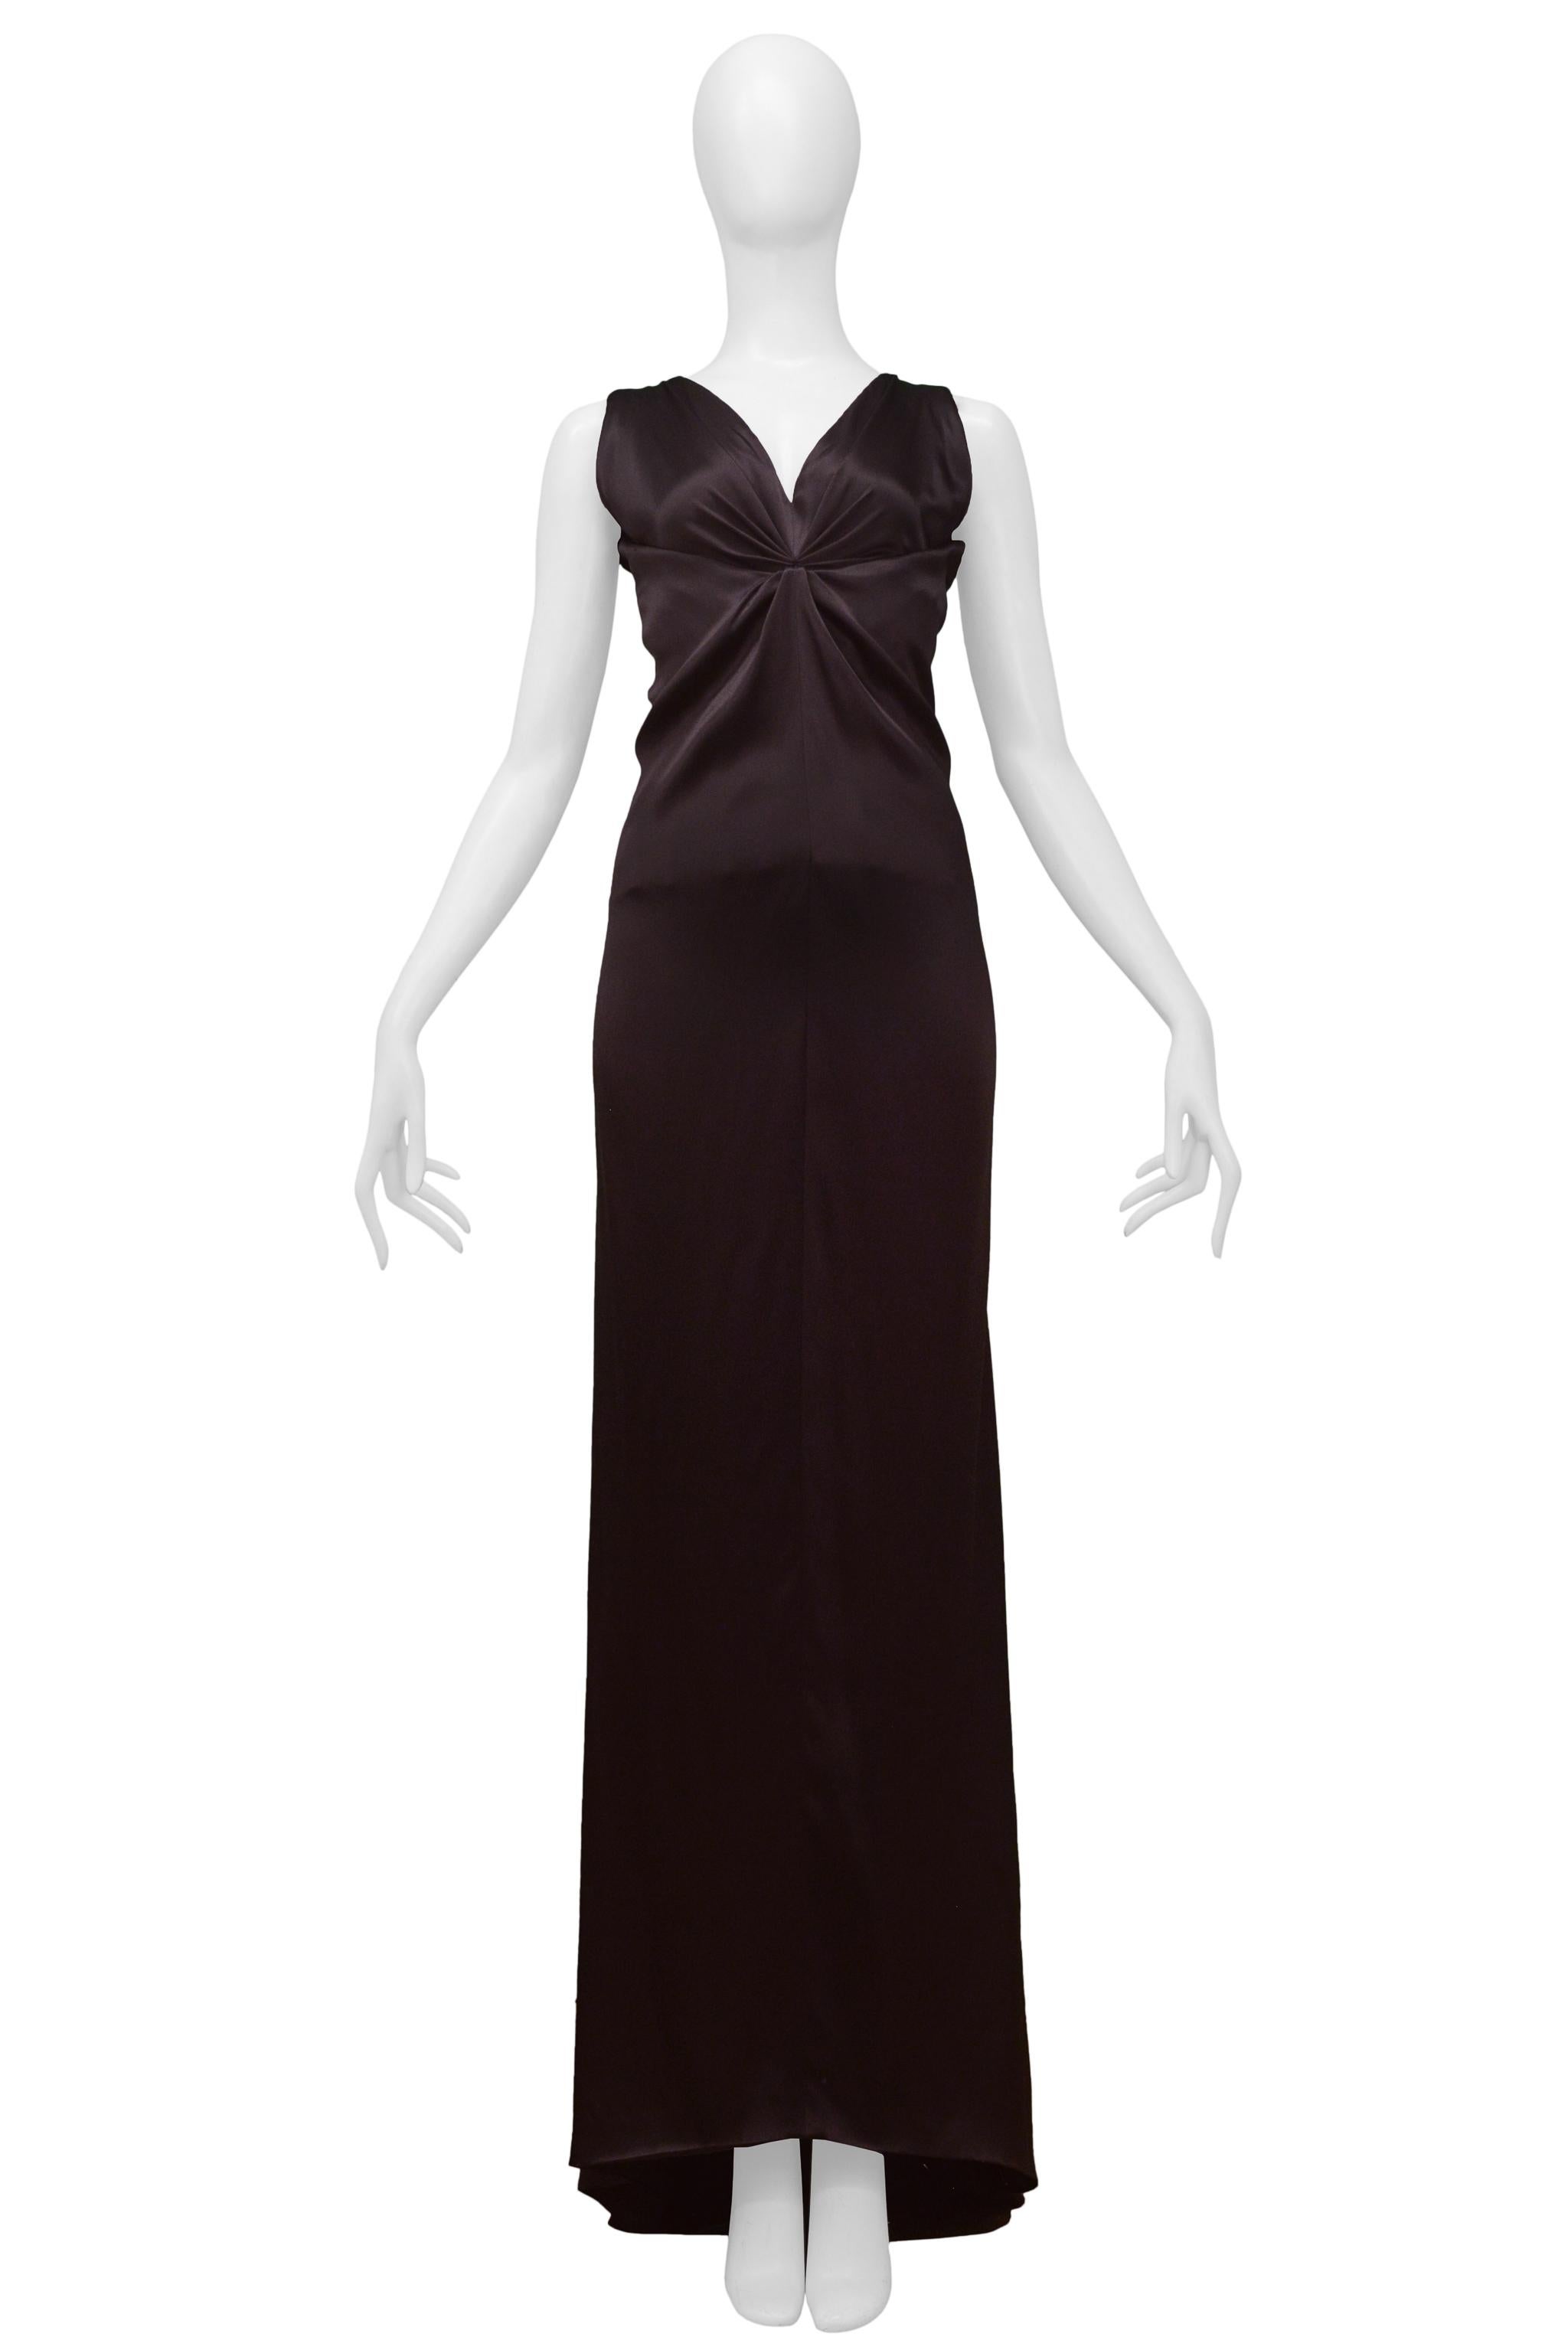 Resurrection Vintage is excited to offer a vintage dark brown satin Balenciaga by Nicolas Ghesquiere evening gown featuring a v neckline, bodice corset detail with contrasting interior fabric, sleeveless, snap back, and plunging back and train.